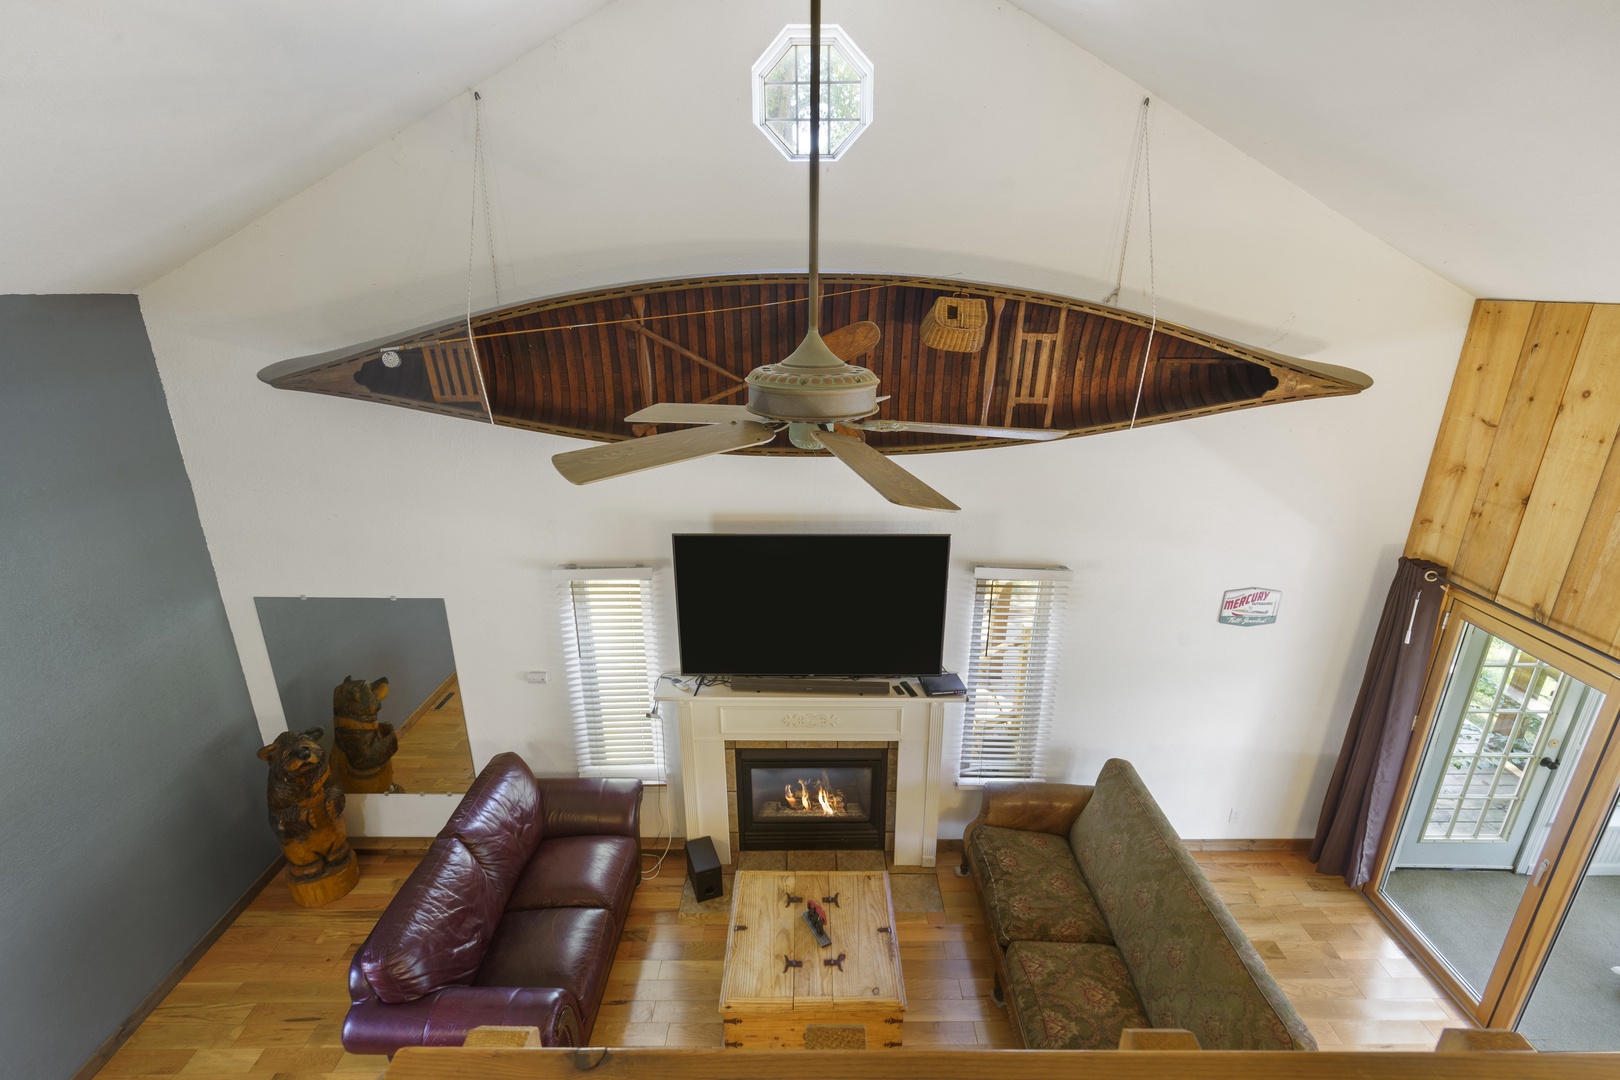 Vaulted ceilings throughout